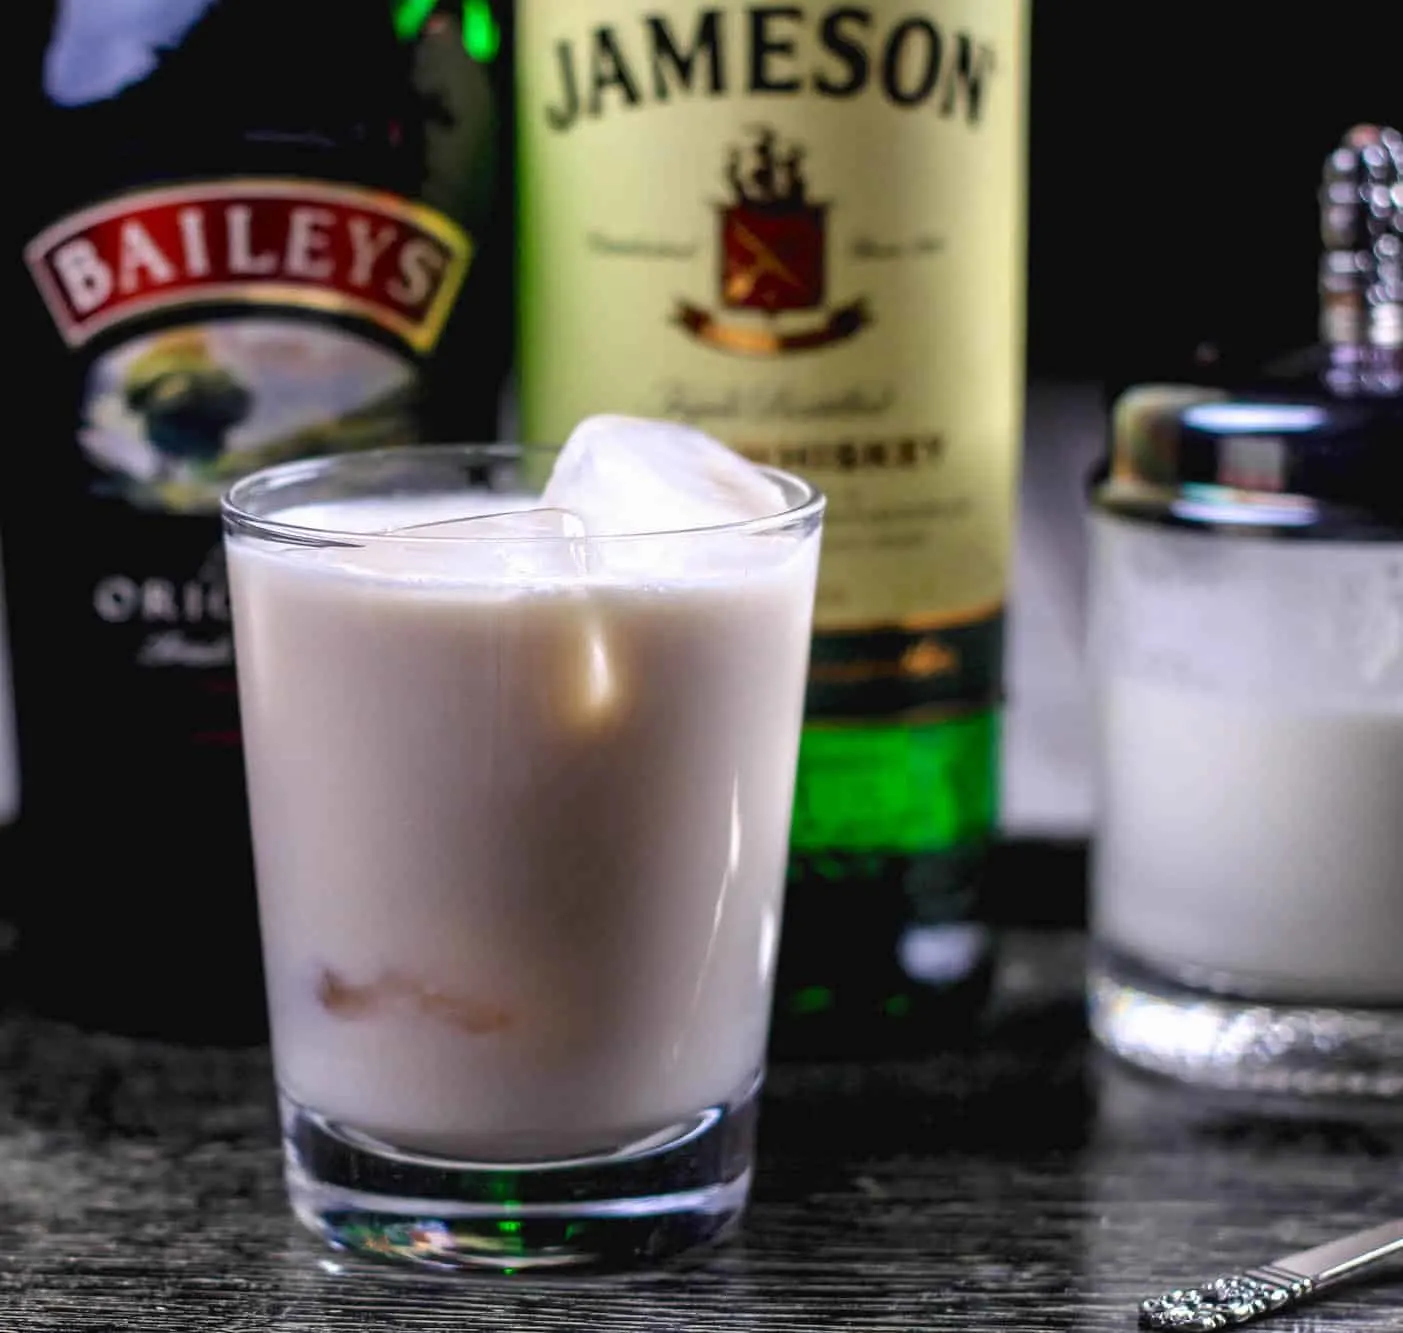 In this Irish White Russian recipe, you'll replace the classic vodka and Kailua with Irish whiskey and coffee liqueur. A fun twist on my favorite drink!